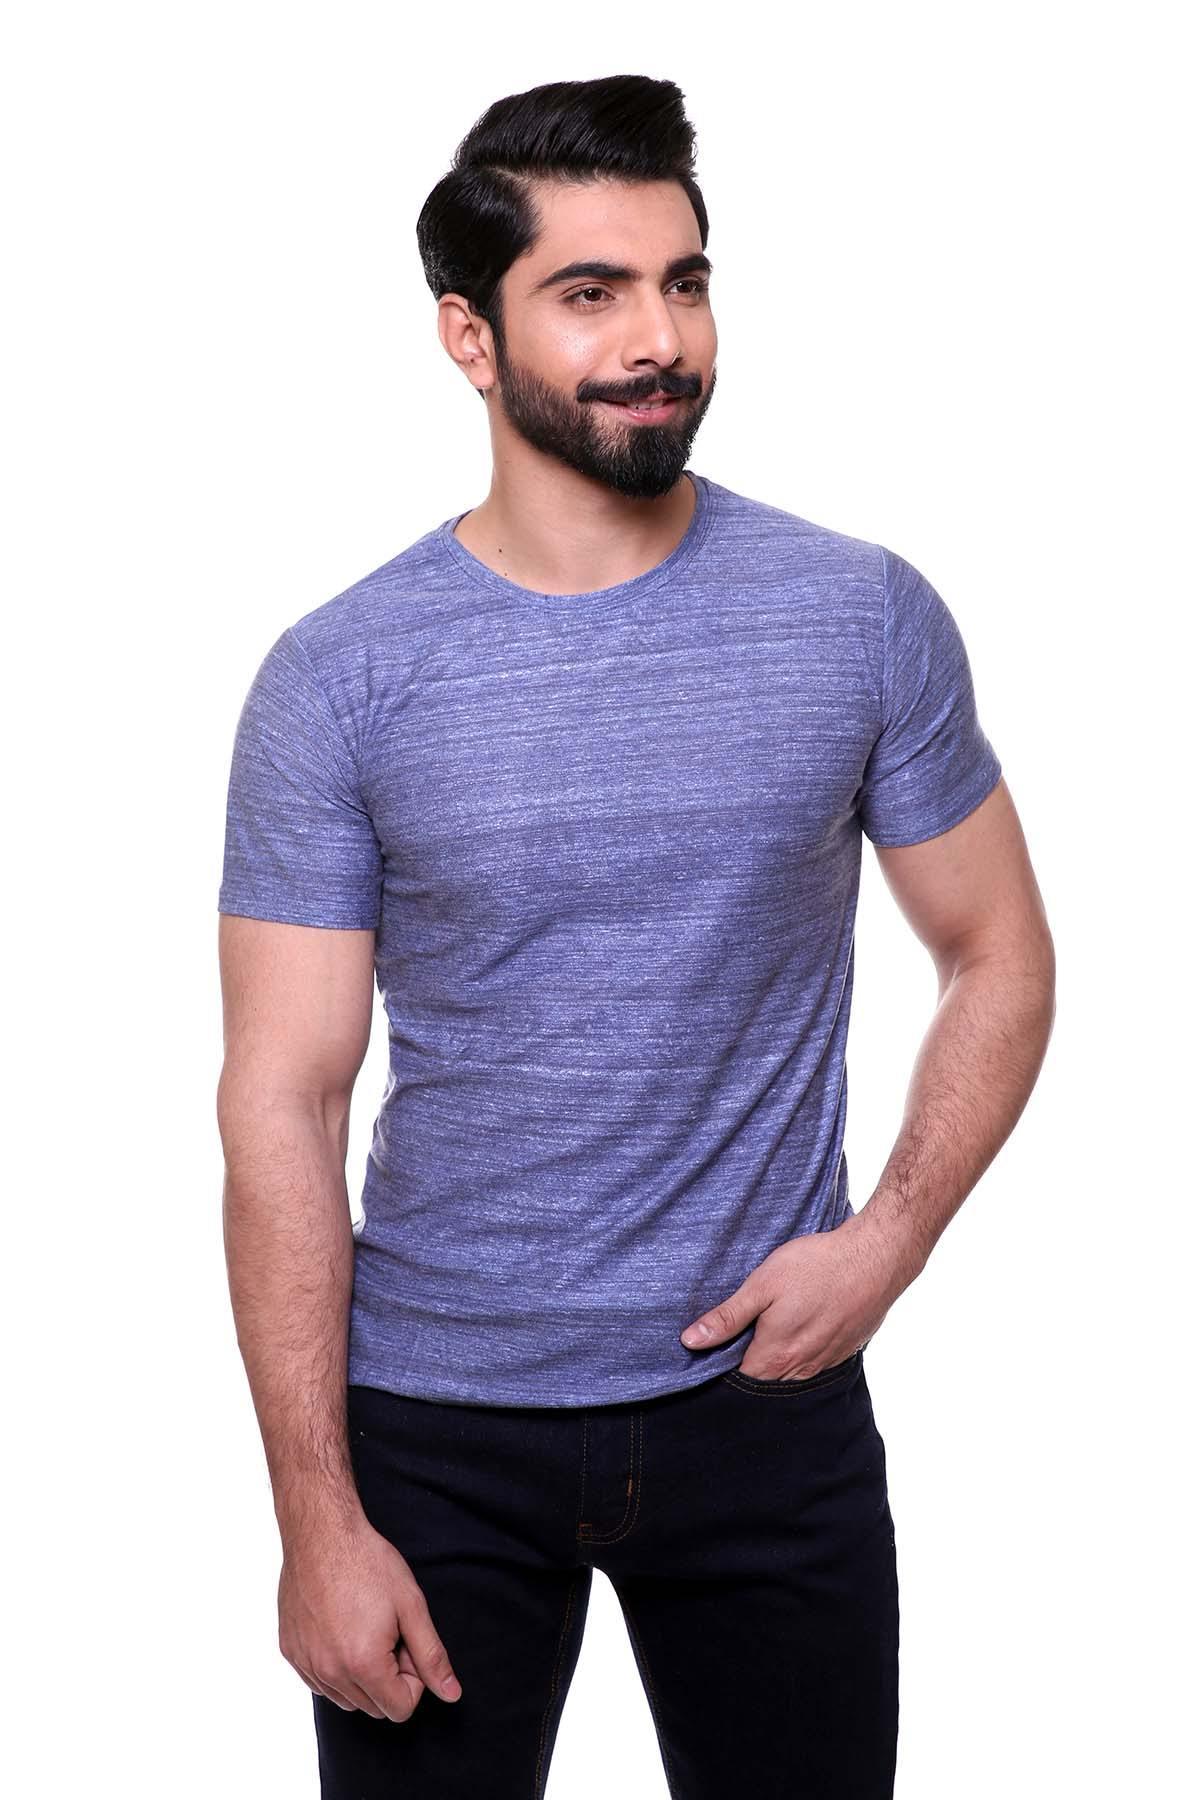 T SHIRT ROUND NECK BLUE at Charcoal Clothing